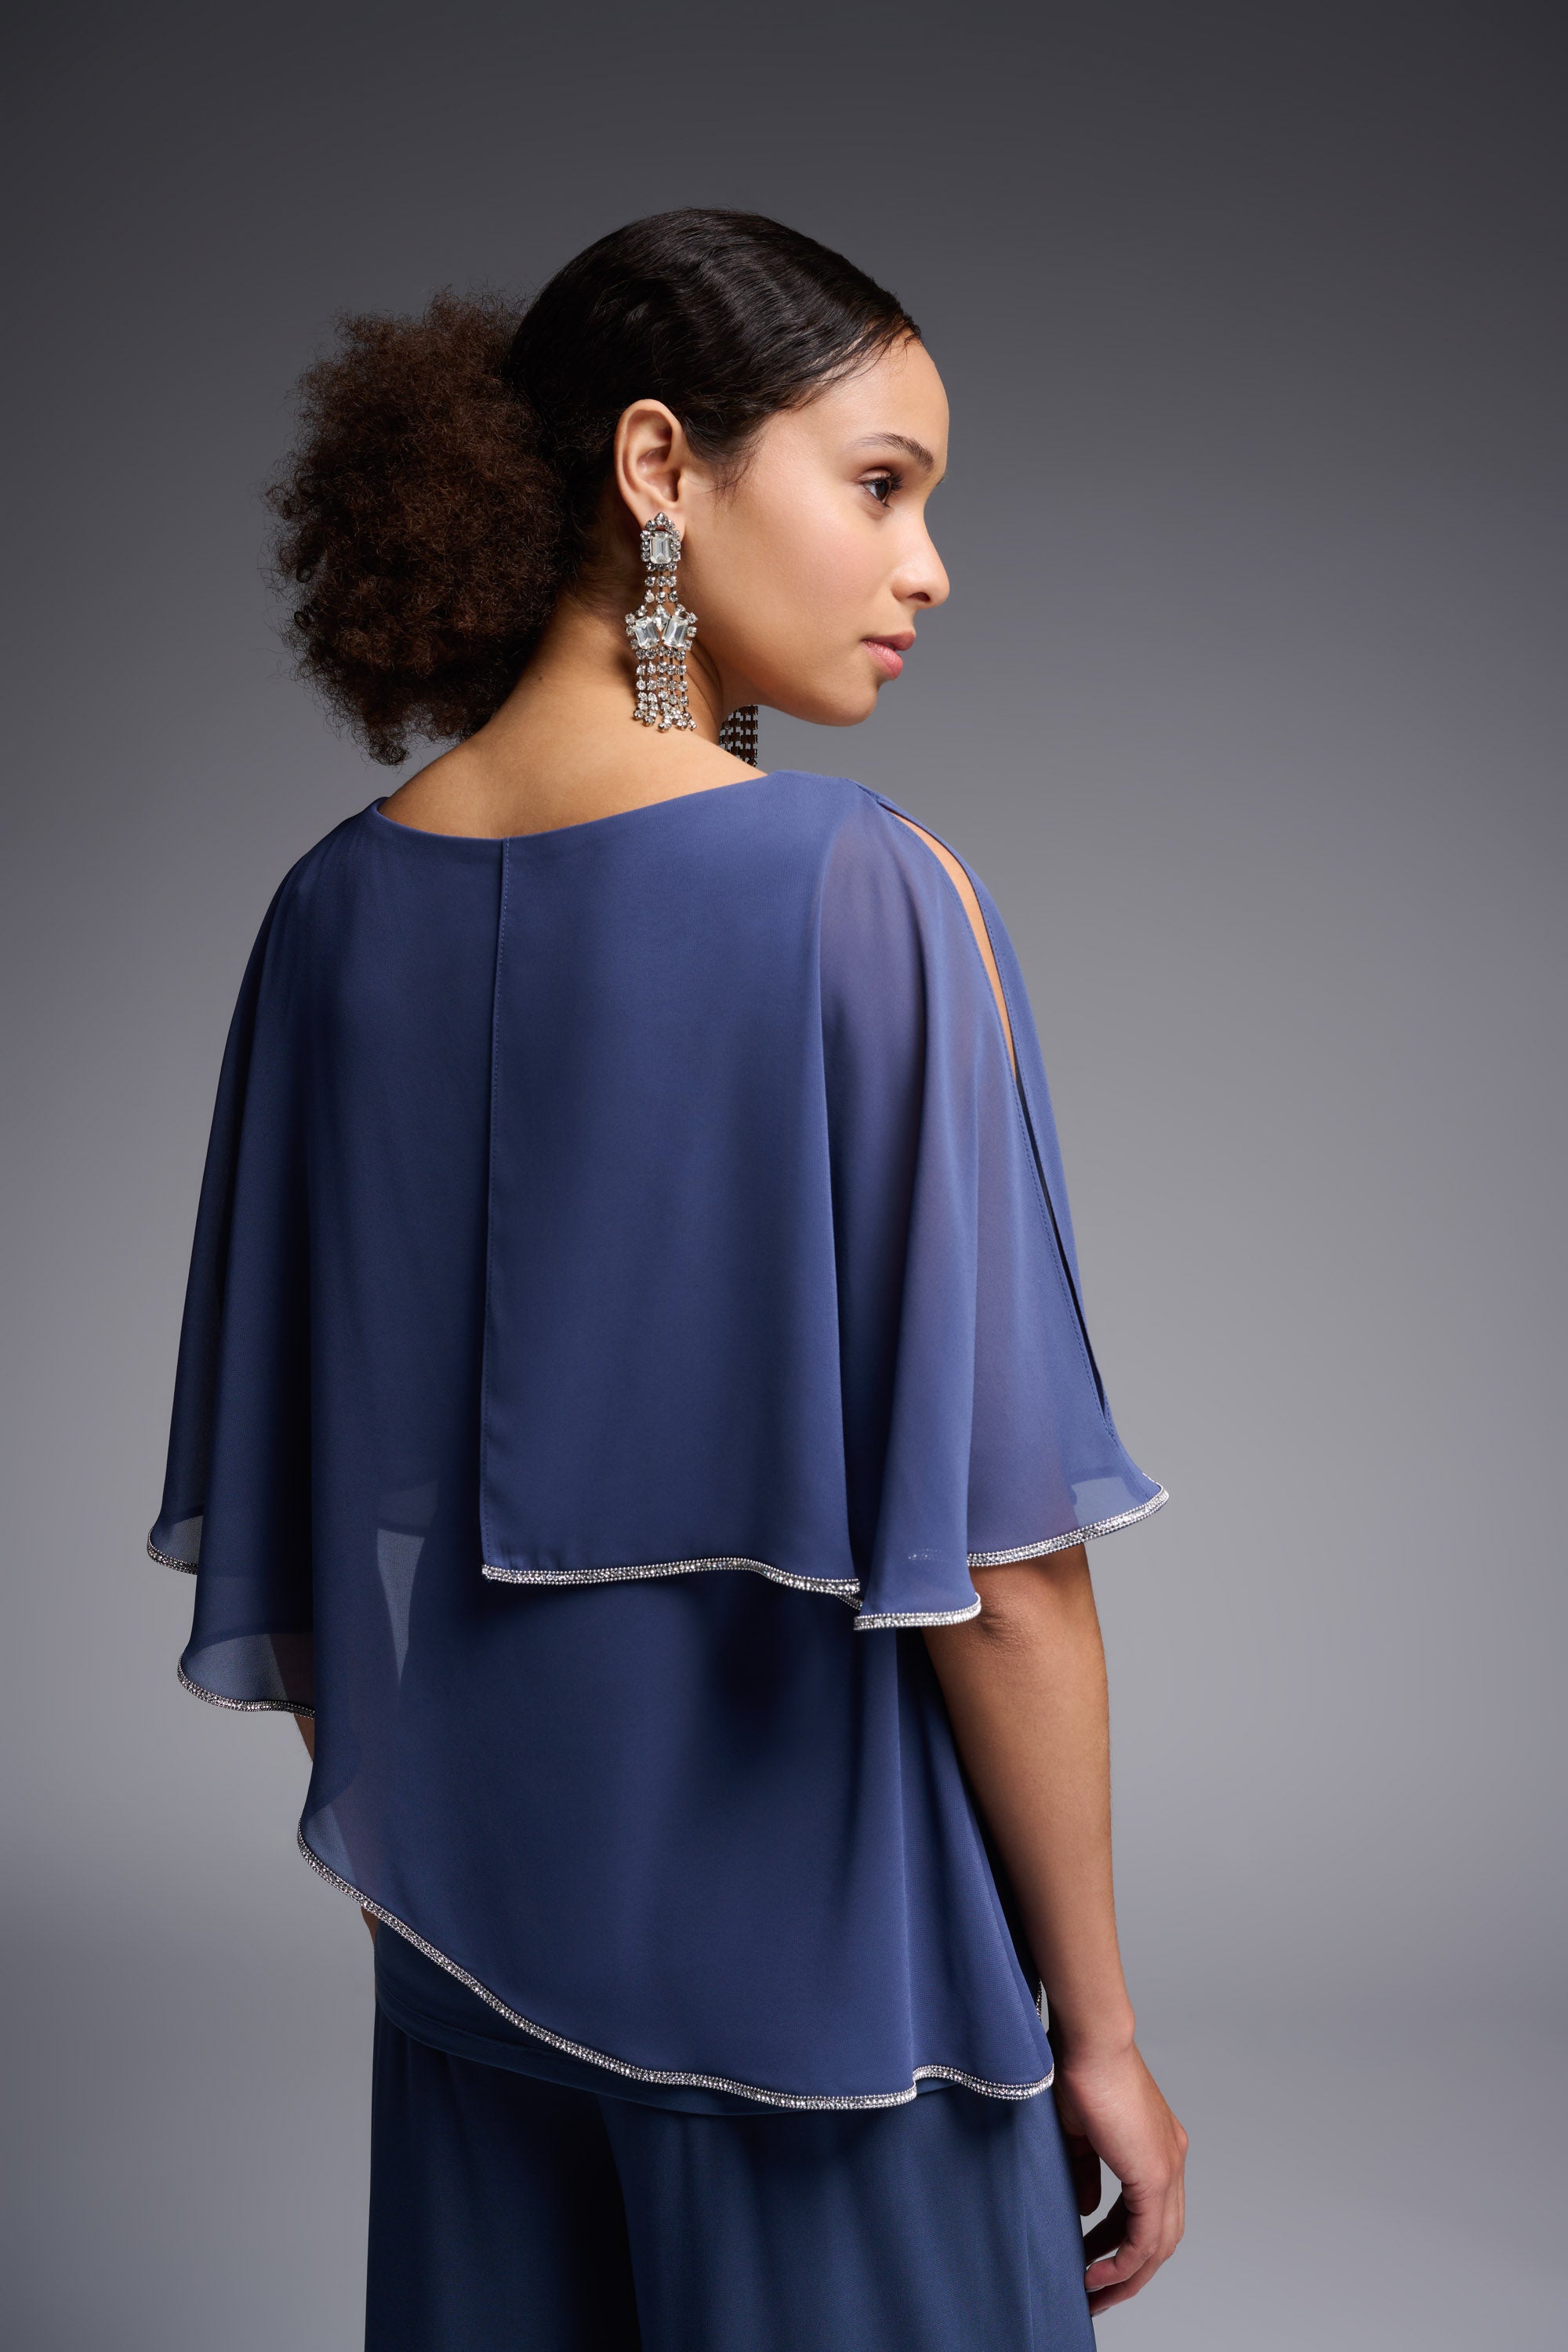 Chiffon Poncho Style V-Neck Top in Mineral Blue 231720